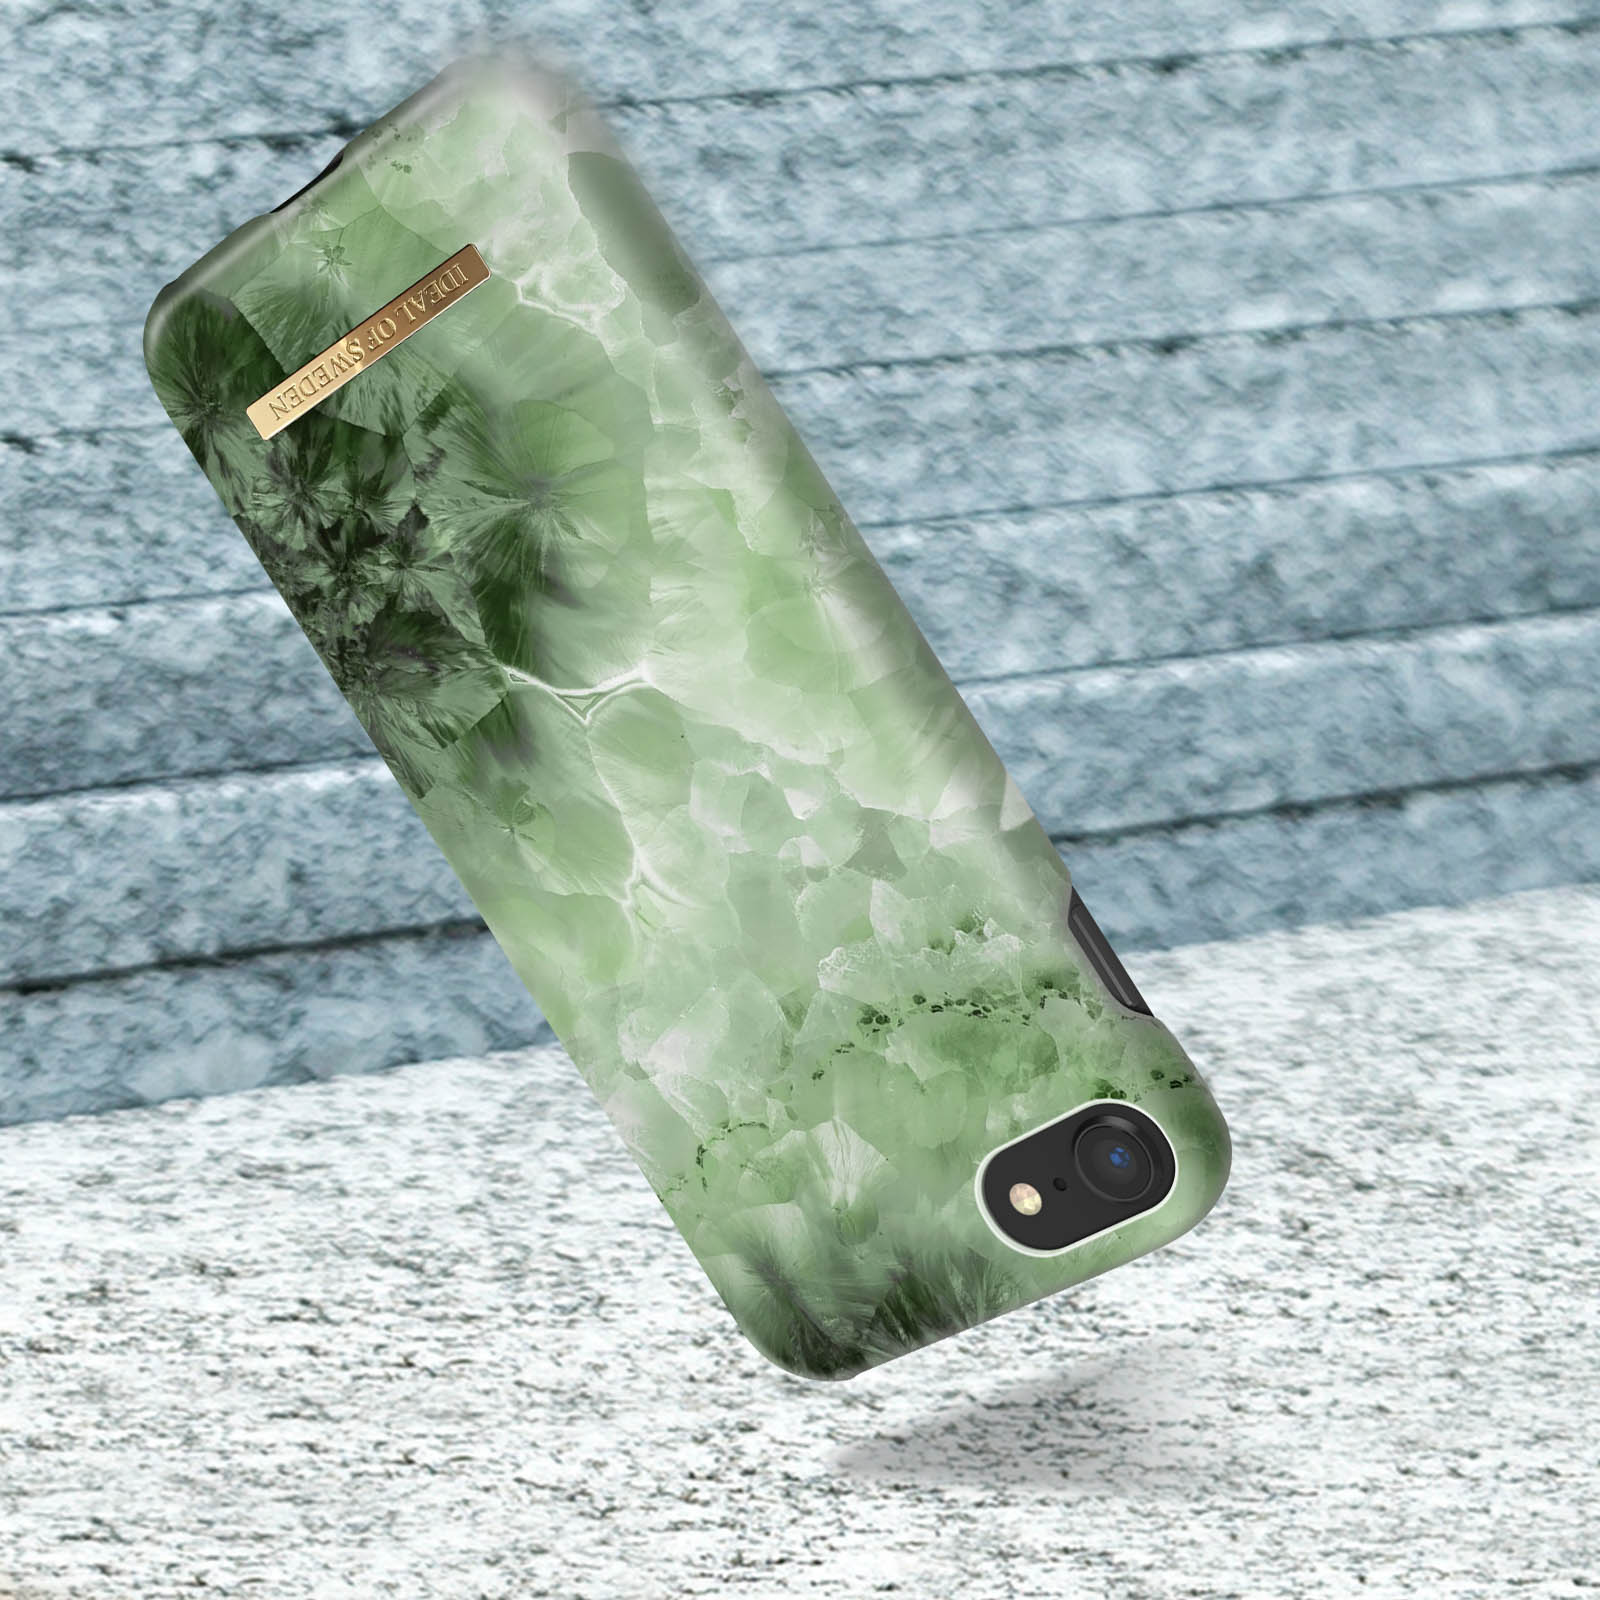 IDEAL OF Apple Apple 8, Backcover, SE 7, Apple, (2020), iPhone Green Sky Crystal SWEDEN Apple IDFCAW20-I7-230, Apple iPhone 6(S), iPhone iPhone